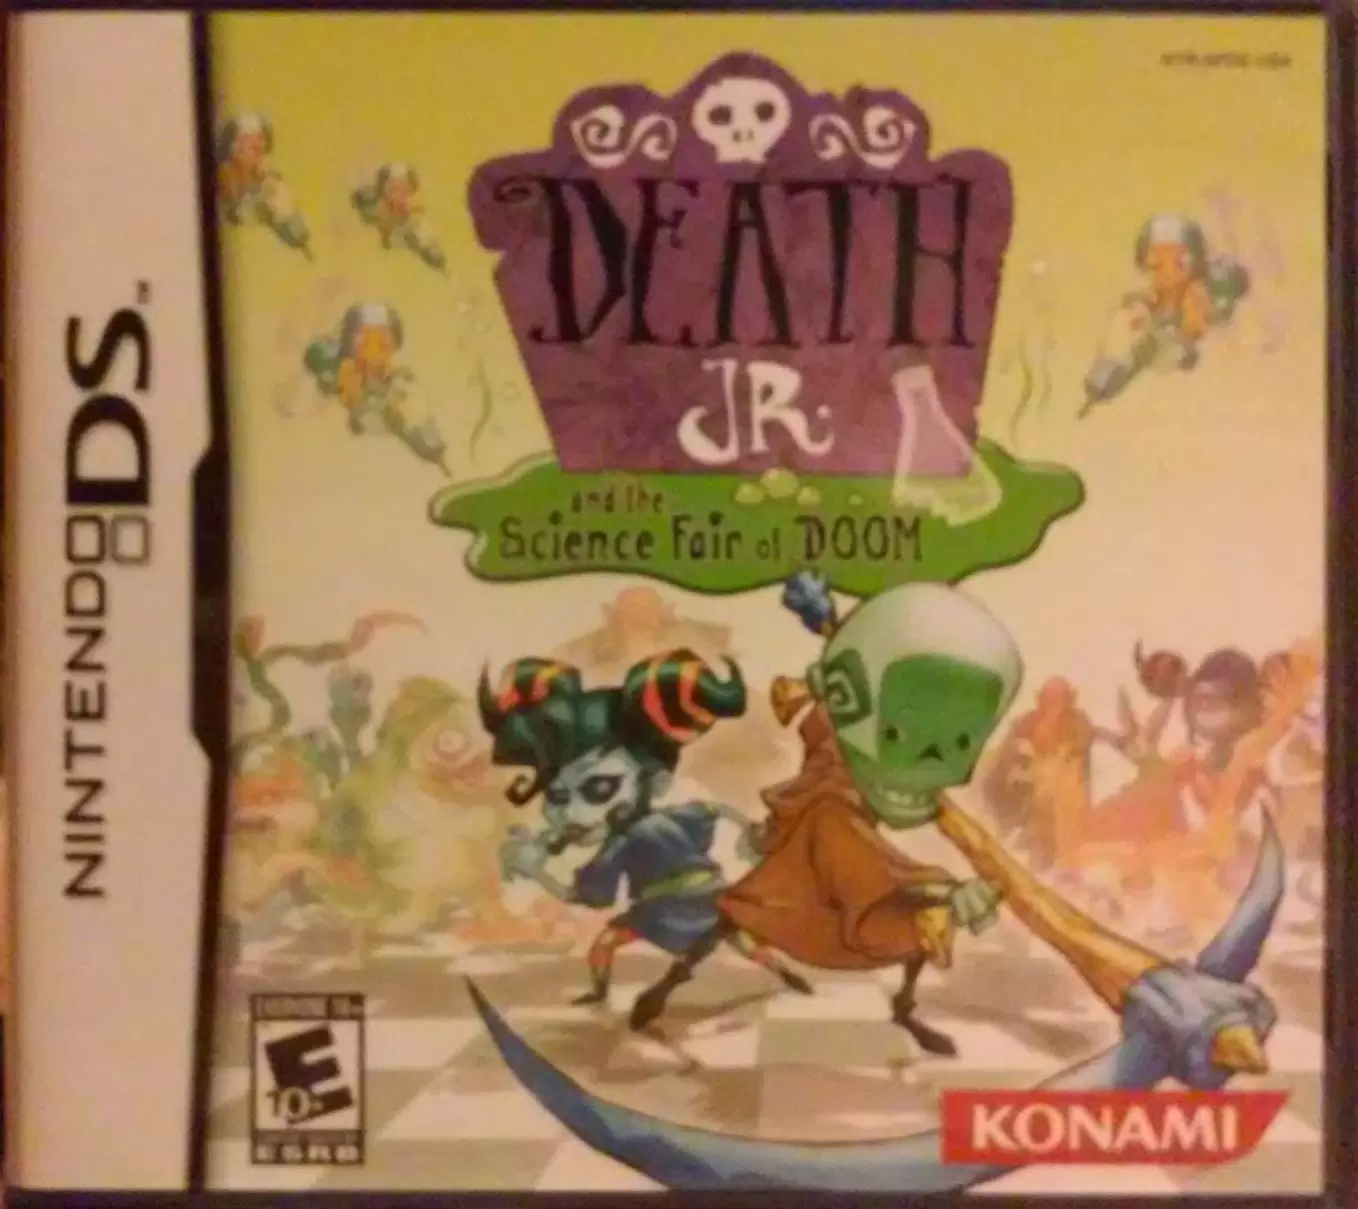 Jeux Nintendo DS - Death Jr. and the Science Fair of Doom